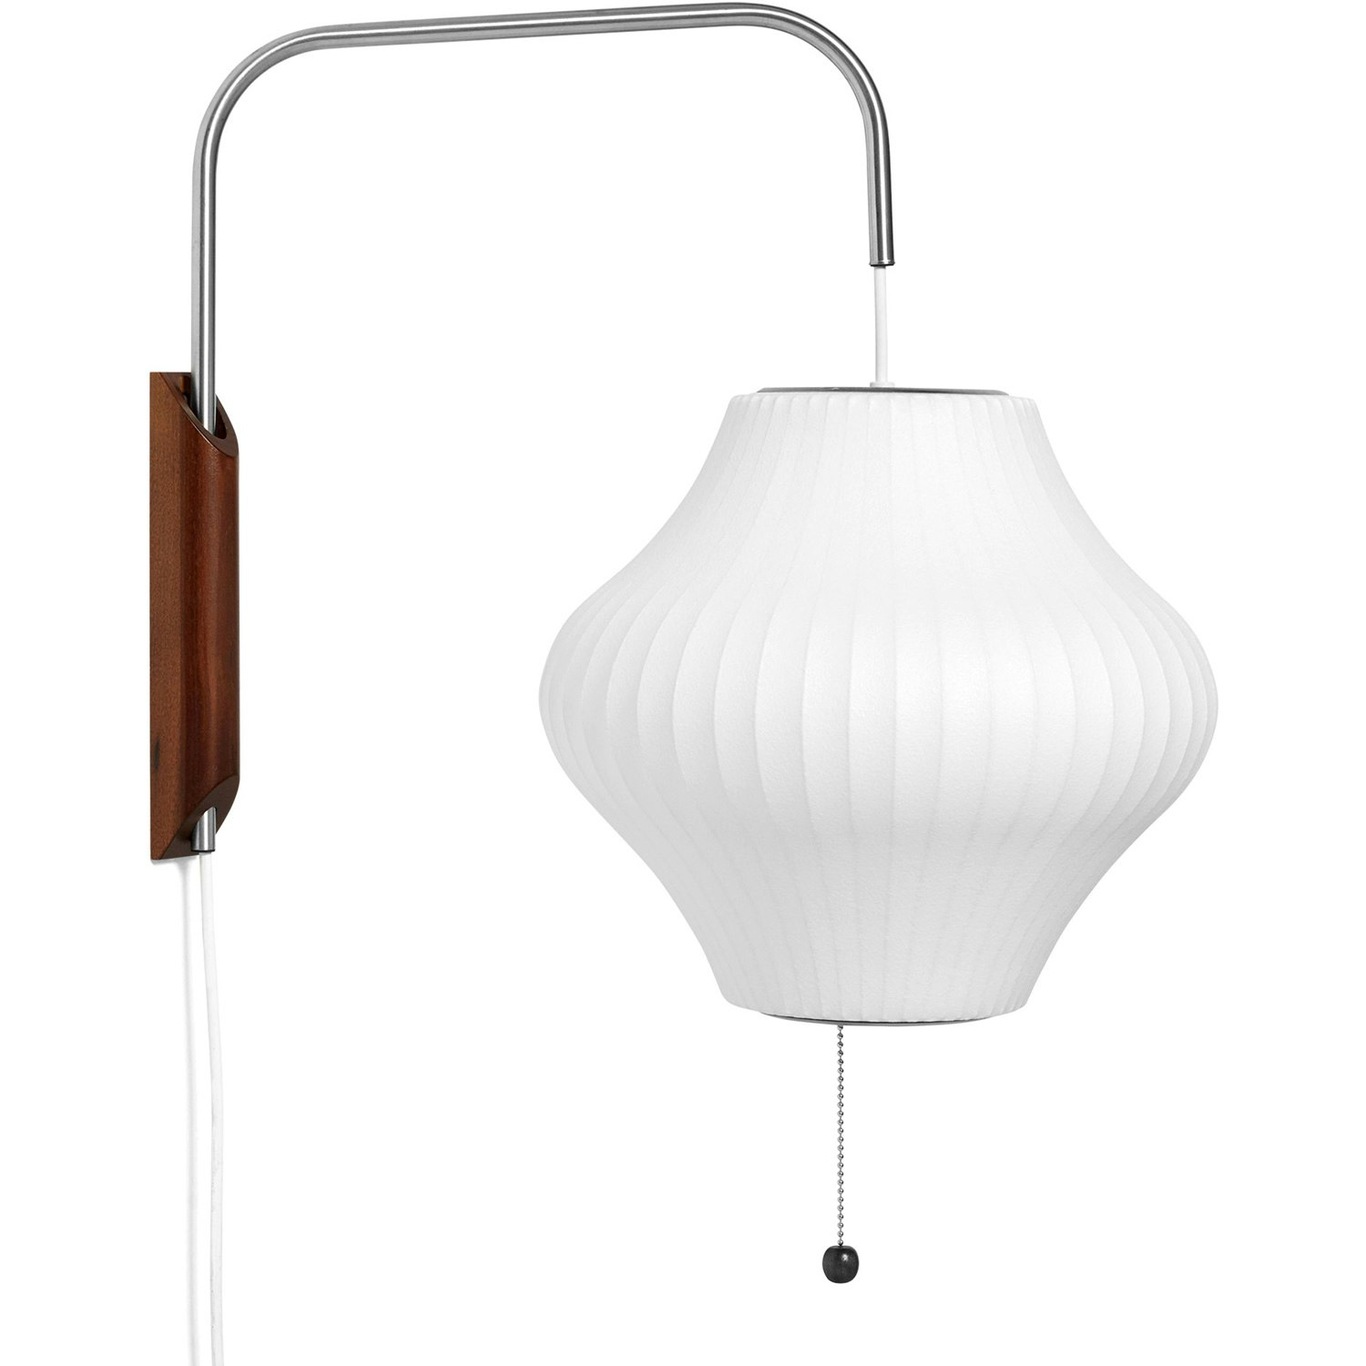 Nelson Pear Muurlicht Sconce Cabled S